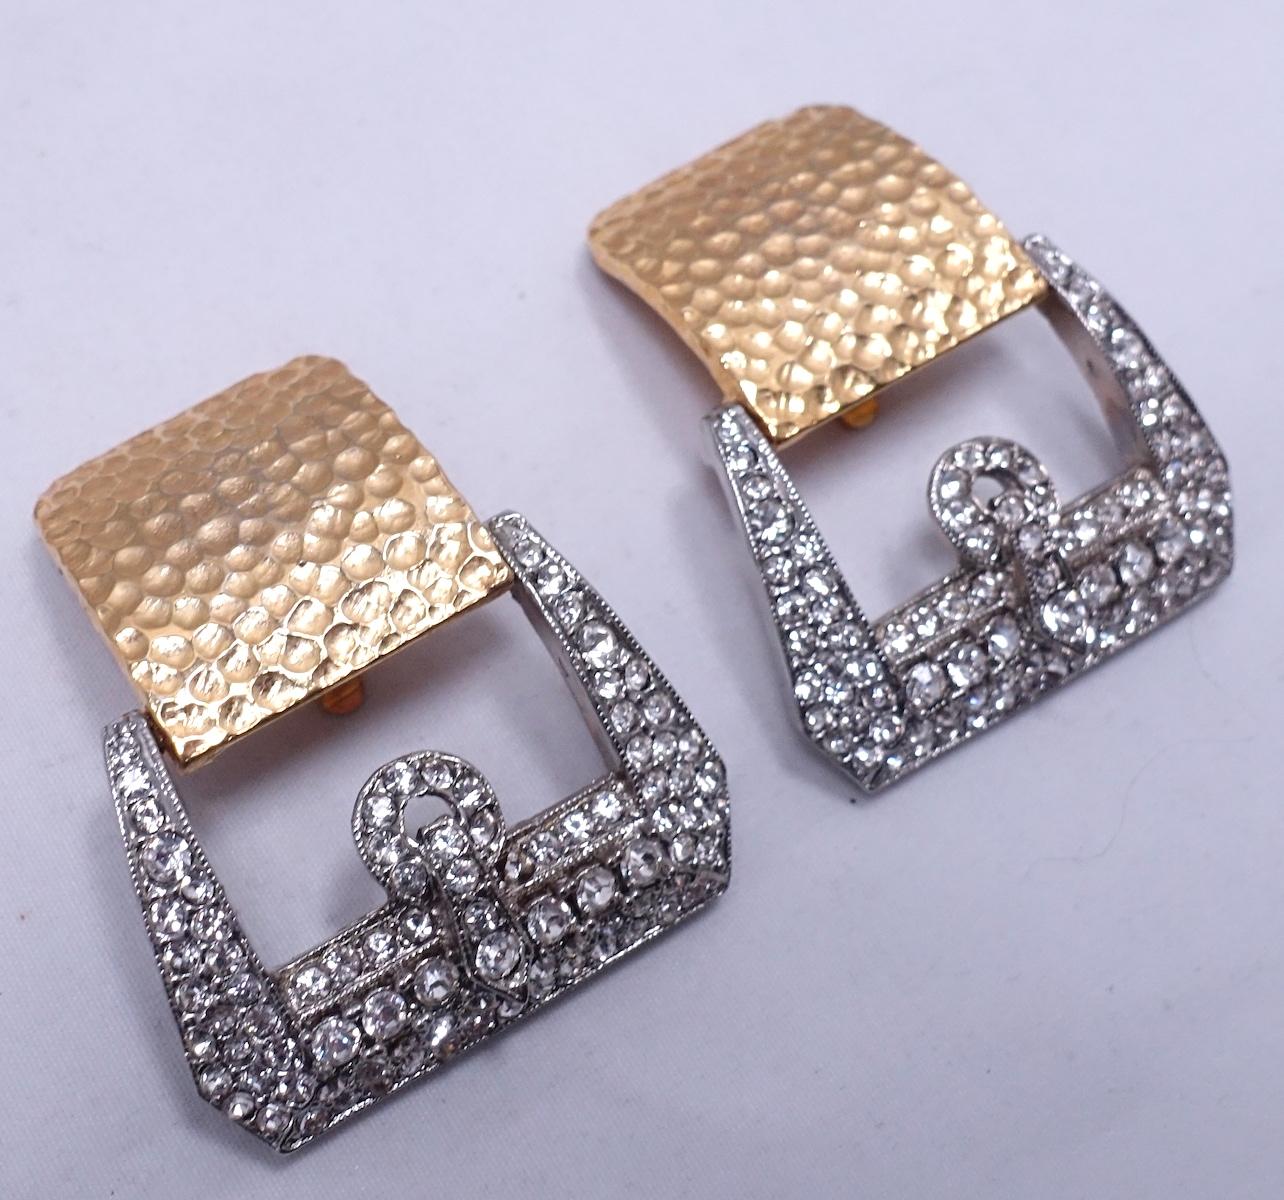 This signed Kenneth Lane earrings feature a buckle design with clear crystal accents in a mixed metal of gold & silver tone.  In excellent condition, these clip earrings measure1-7/8” x 1-3/8” and are signed “Kenneth Lane”.